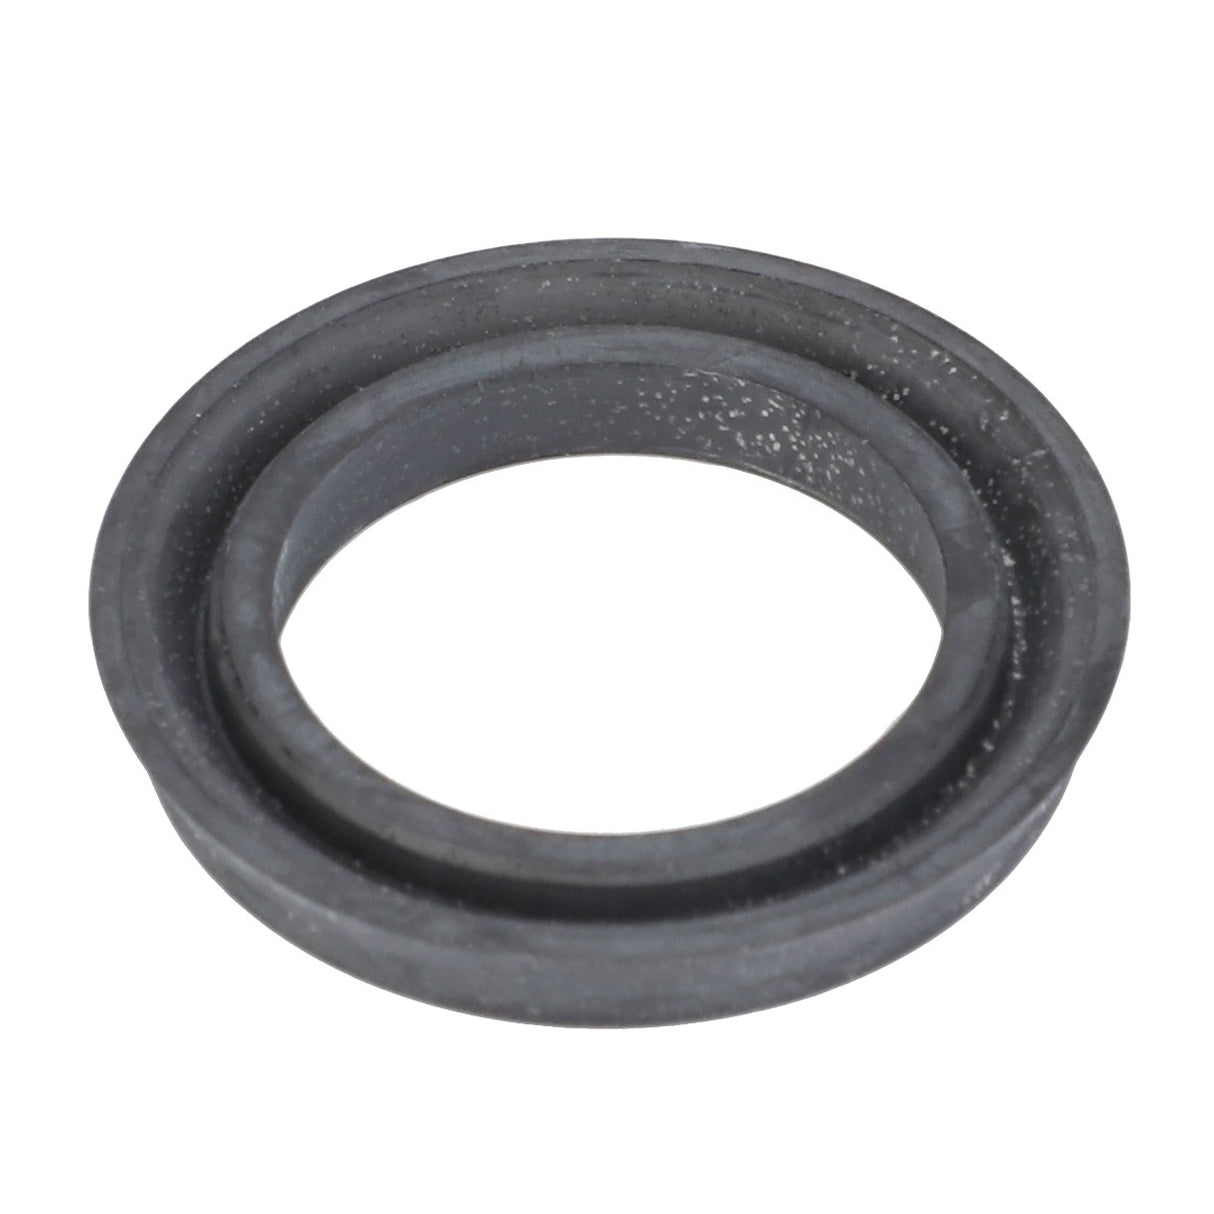 AGCO | Grooved Ring - F184108150150 - Farming Parts